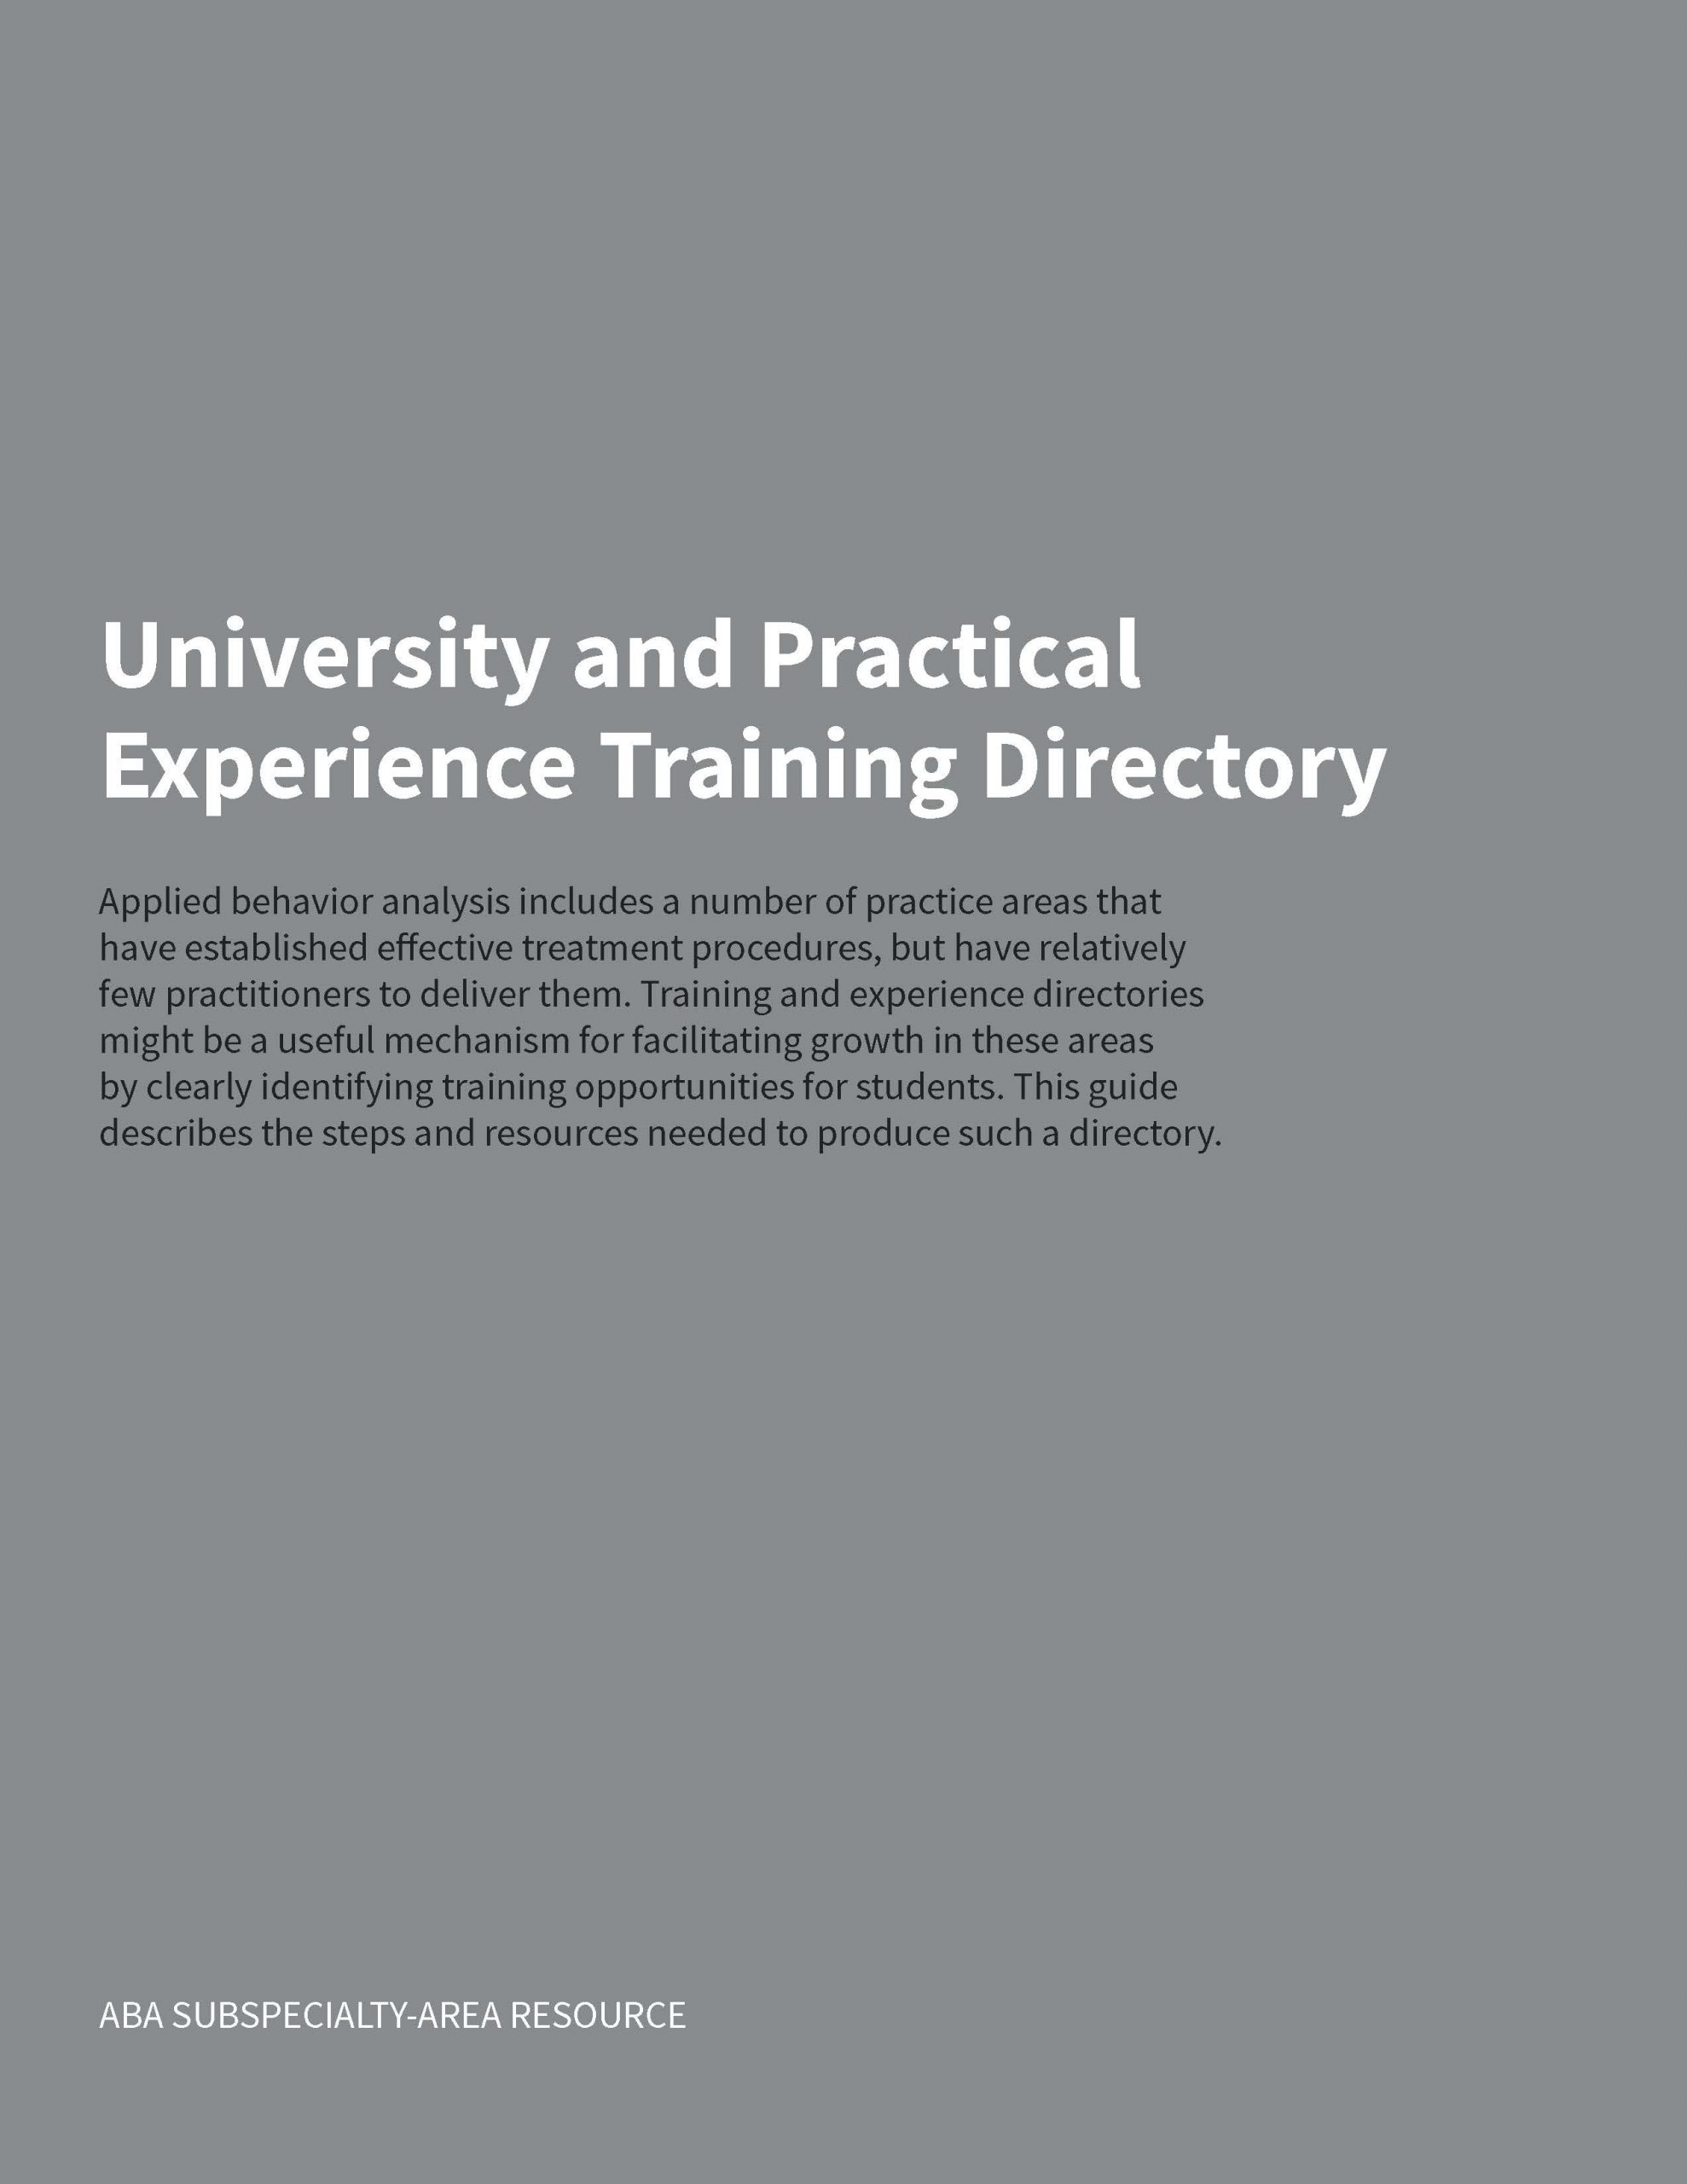 University and Practical Experience Training Directory thumbnail